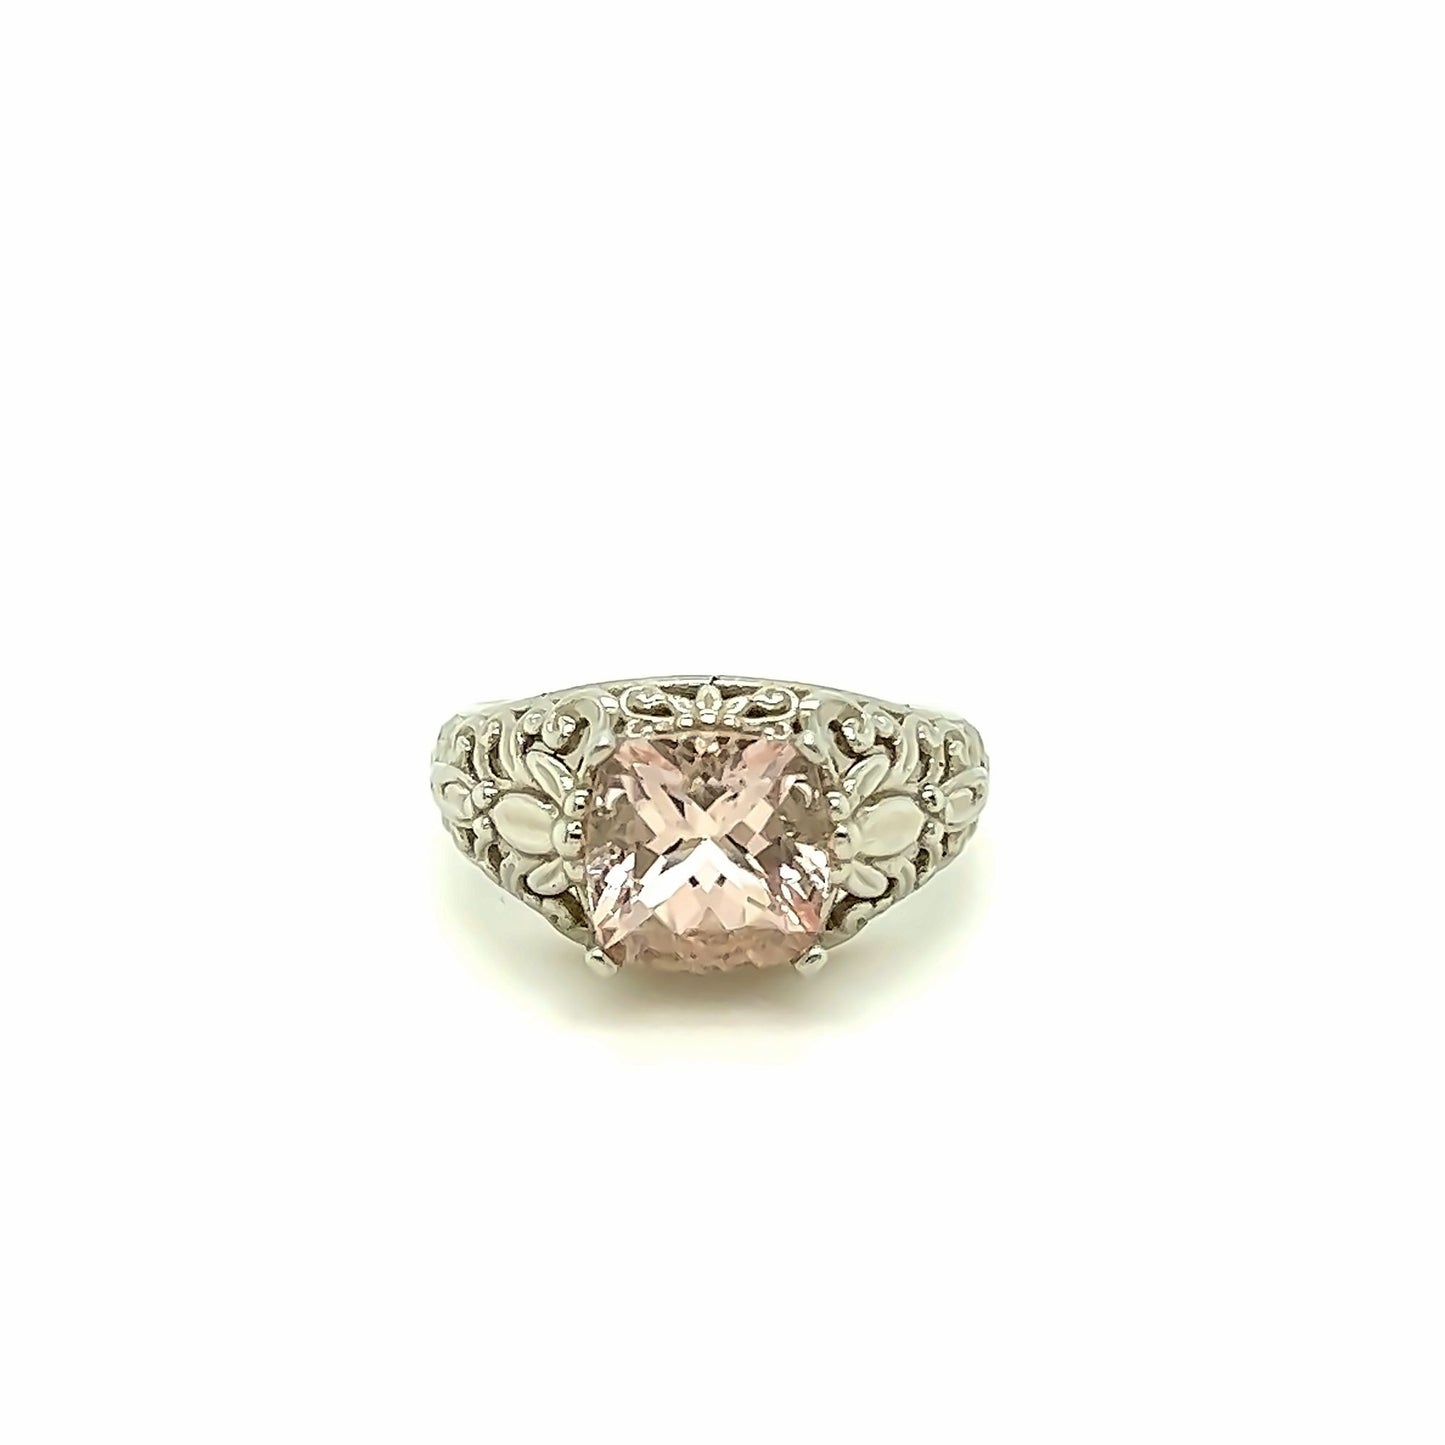 Etched 14kt White Gold Band w/ Cushion Cut Morganite Ring